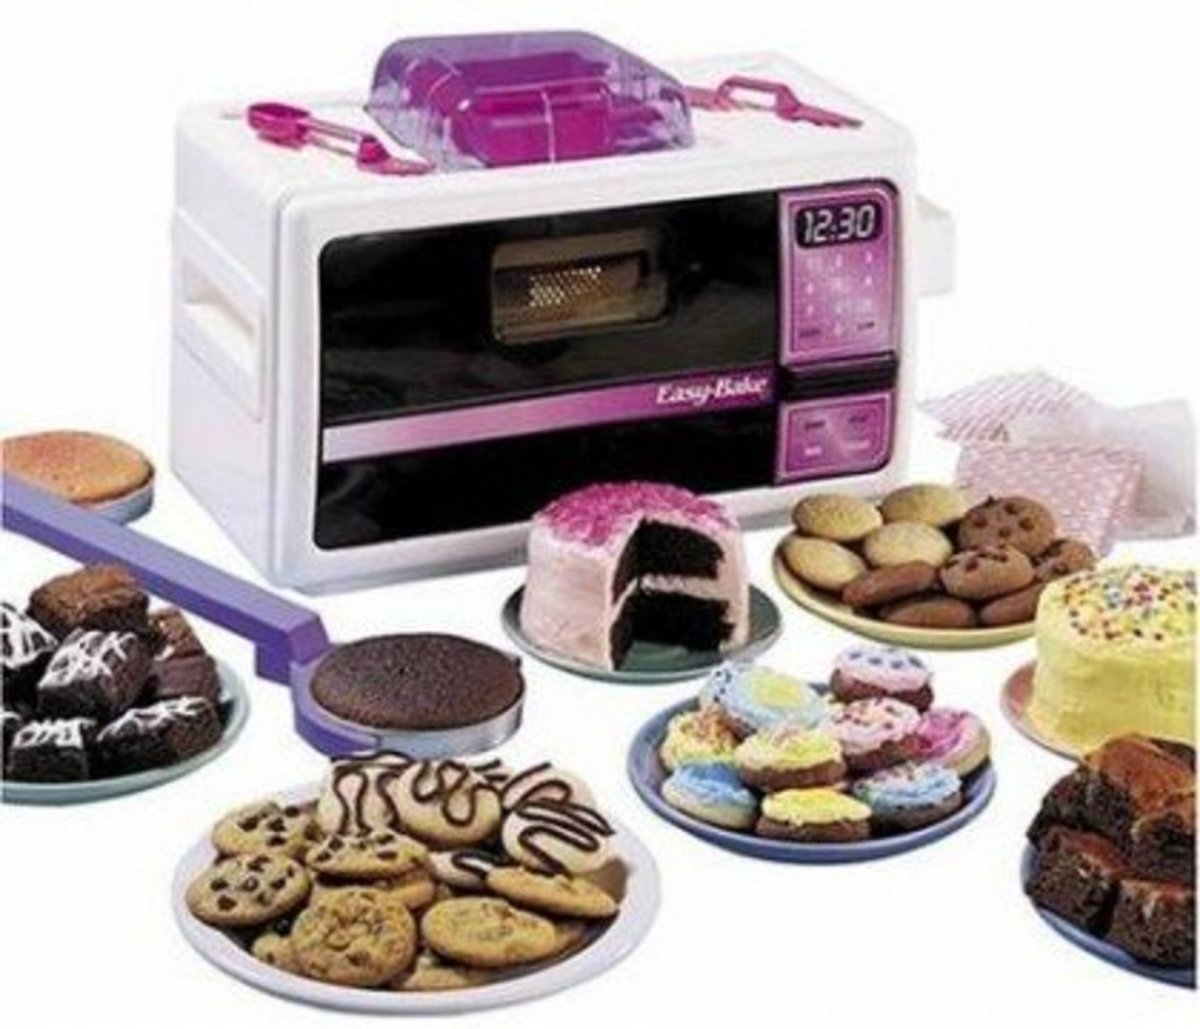 ~TASTY~HOMEMADE EASY BAKE OVEN PIZZA CAKE and FROSTING MIXES SET OF 20 BROWNIE 